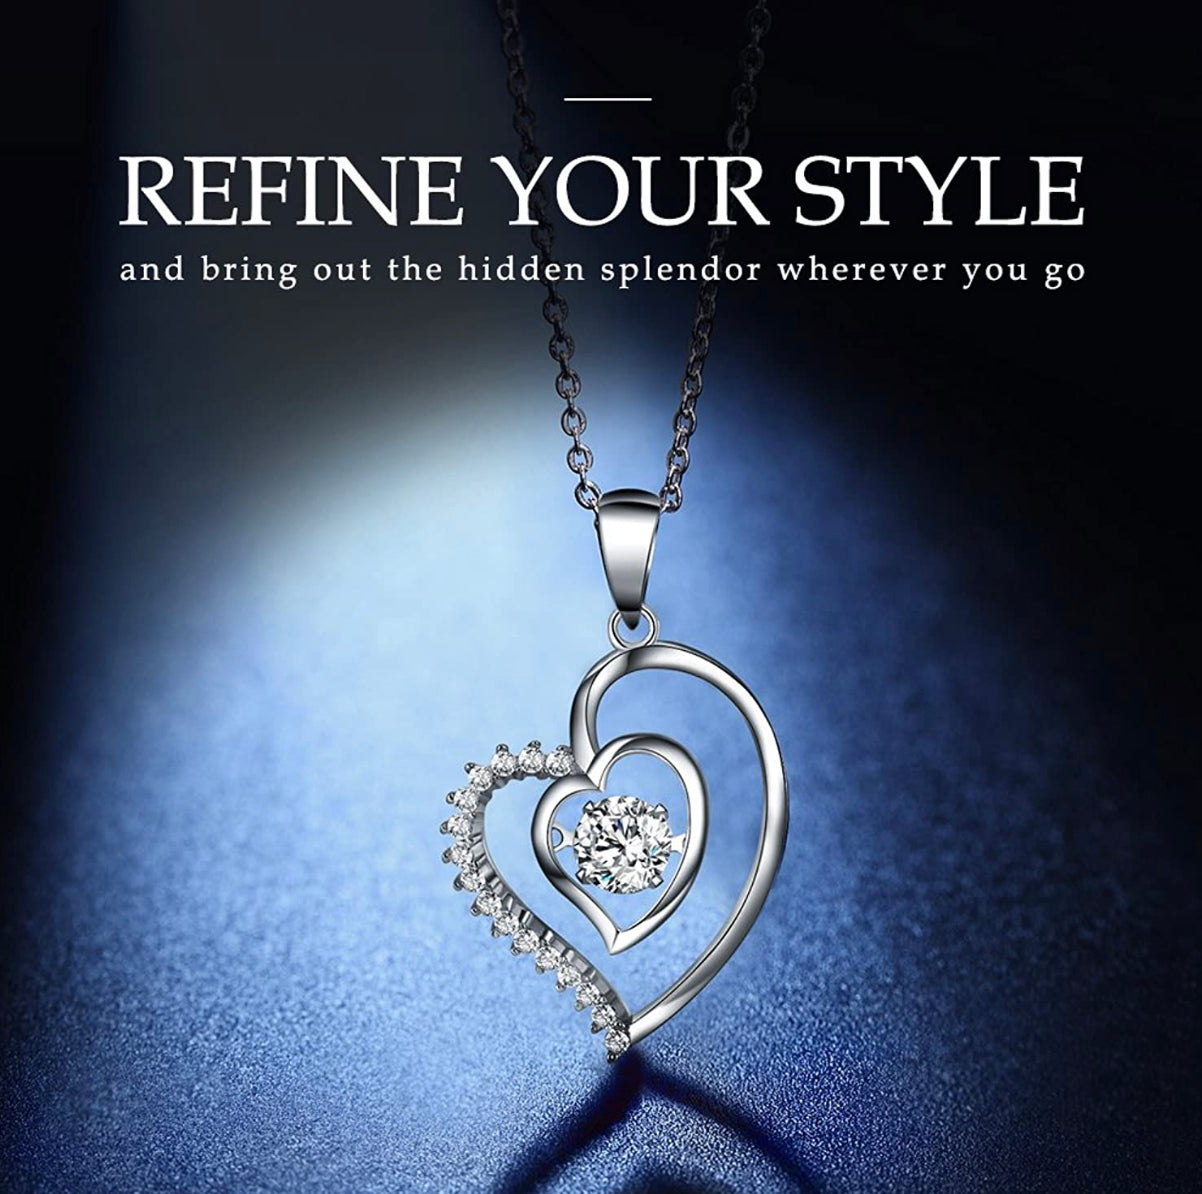 Ripple of Hearts Pendant Necklace